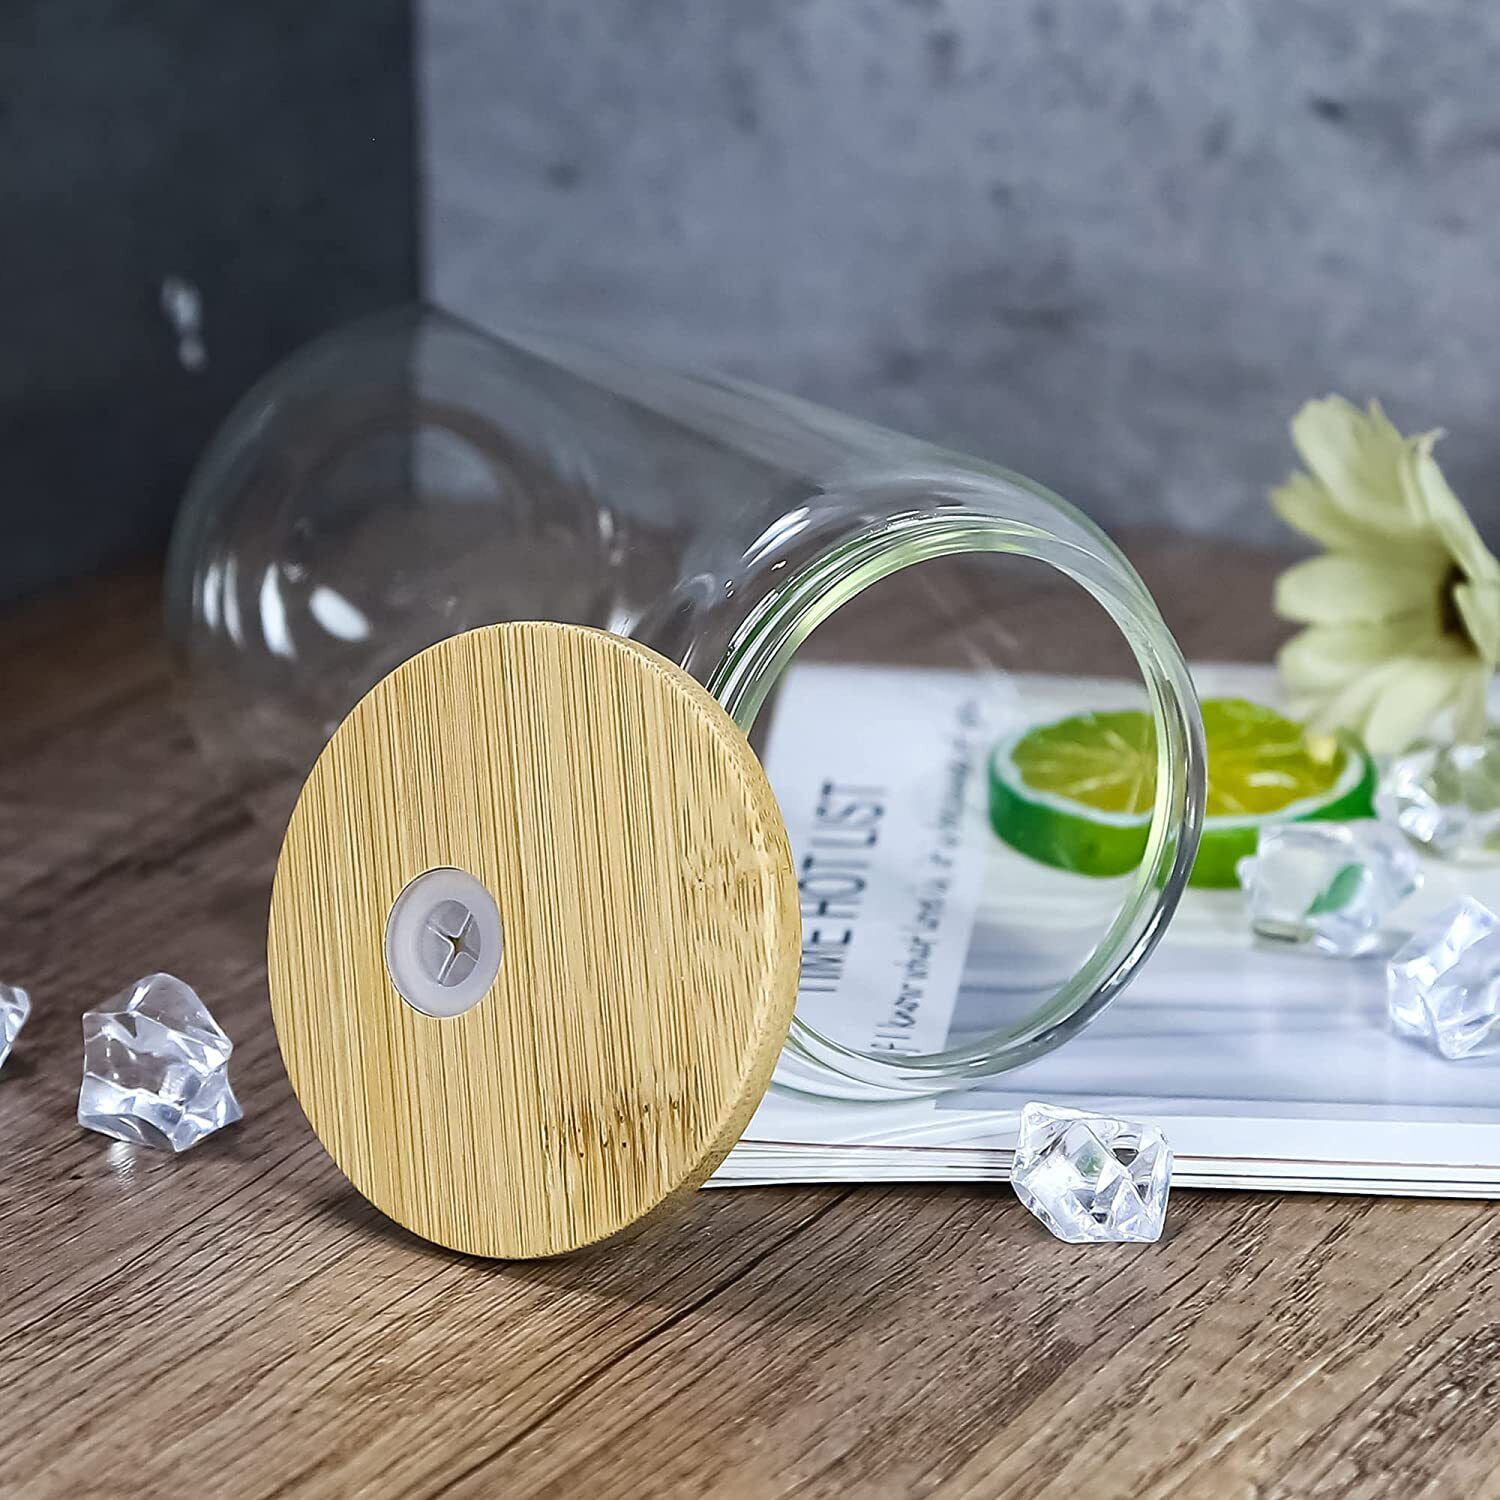 Sublimation Clear/Frosted Glass Blanks with Bamboo Lid - 16oz 4 Pack –  HTVRONT